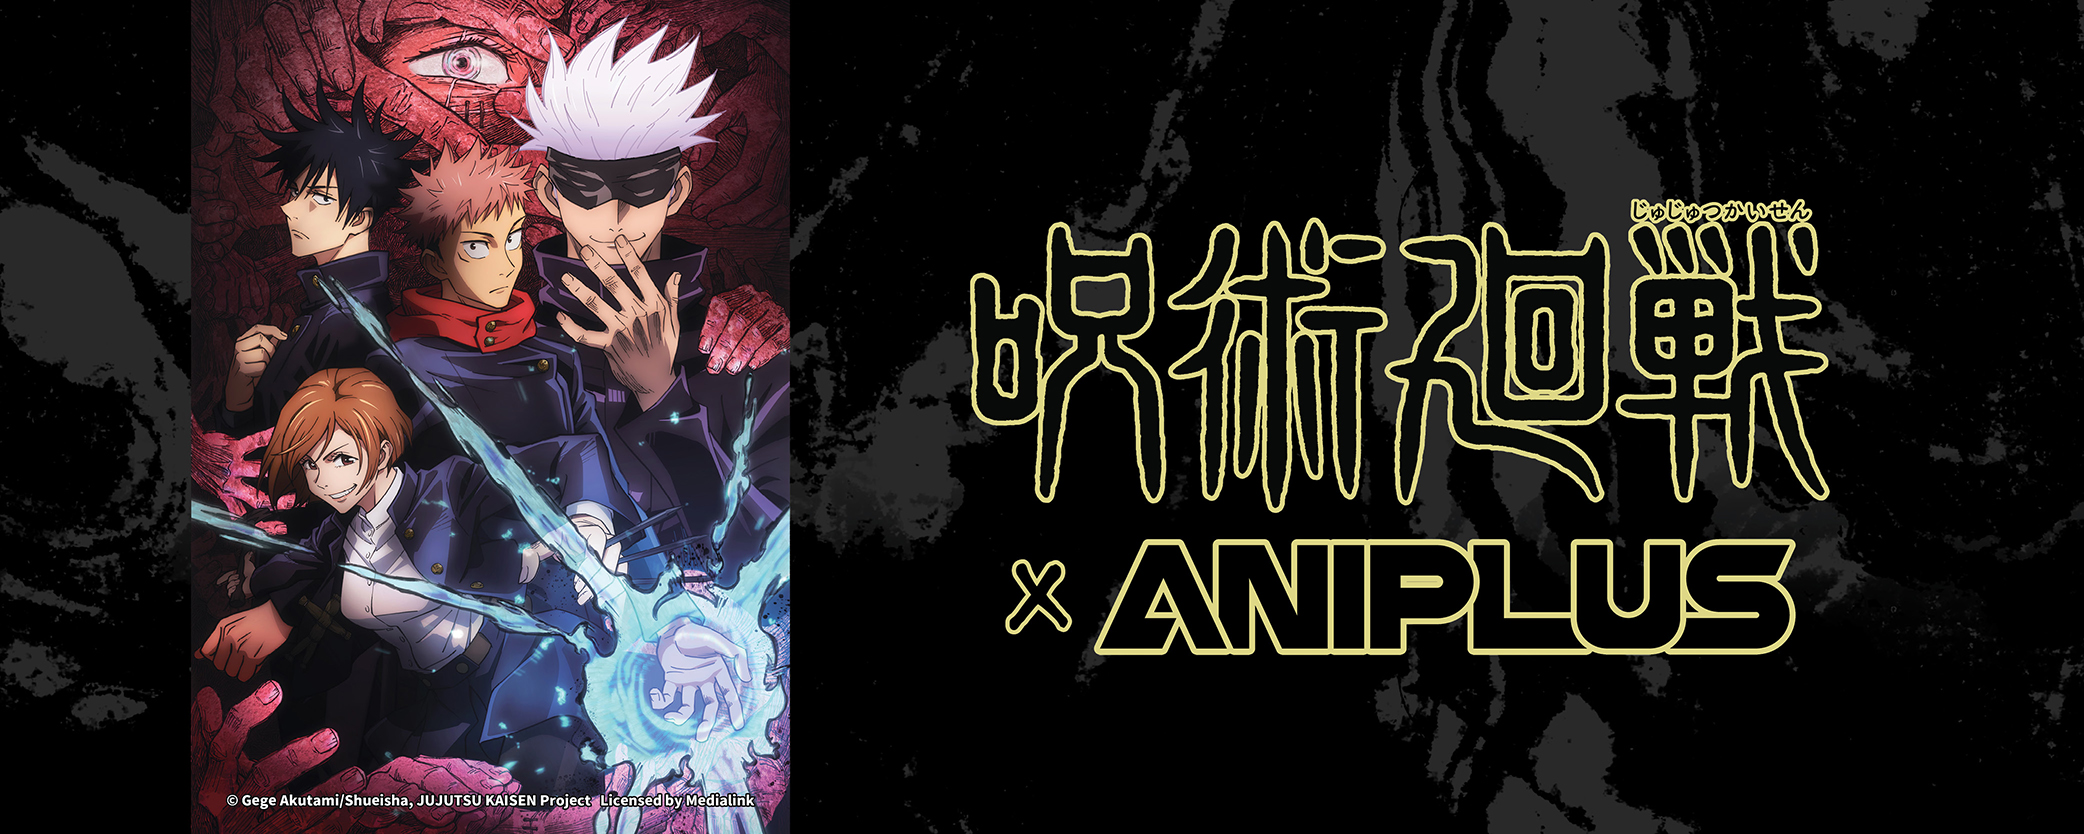 AS-Anime Society - Aniplus Asia popular animes will be streaming